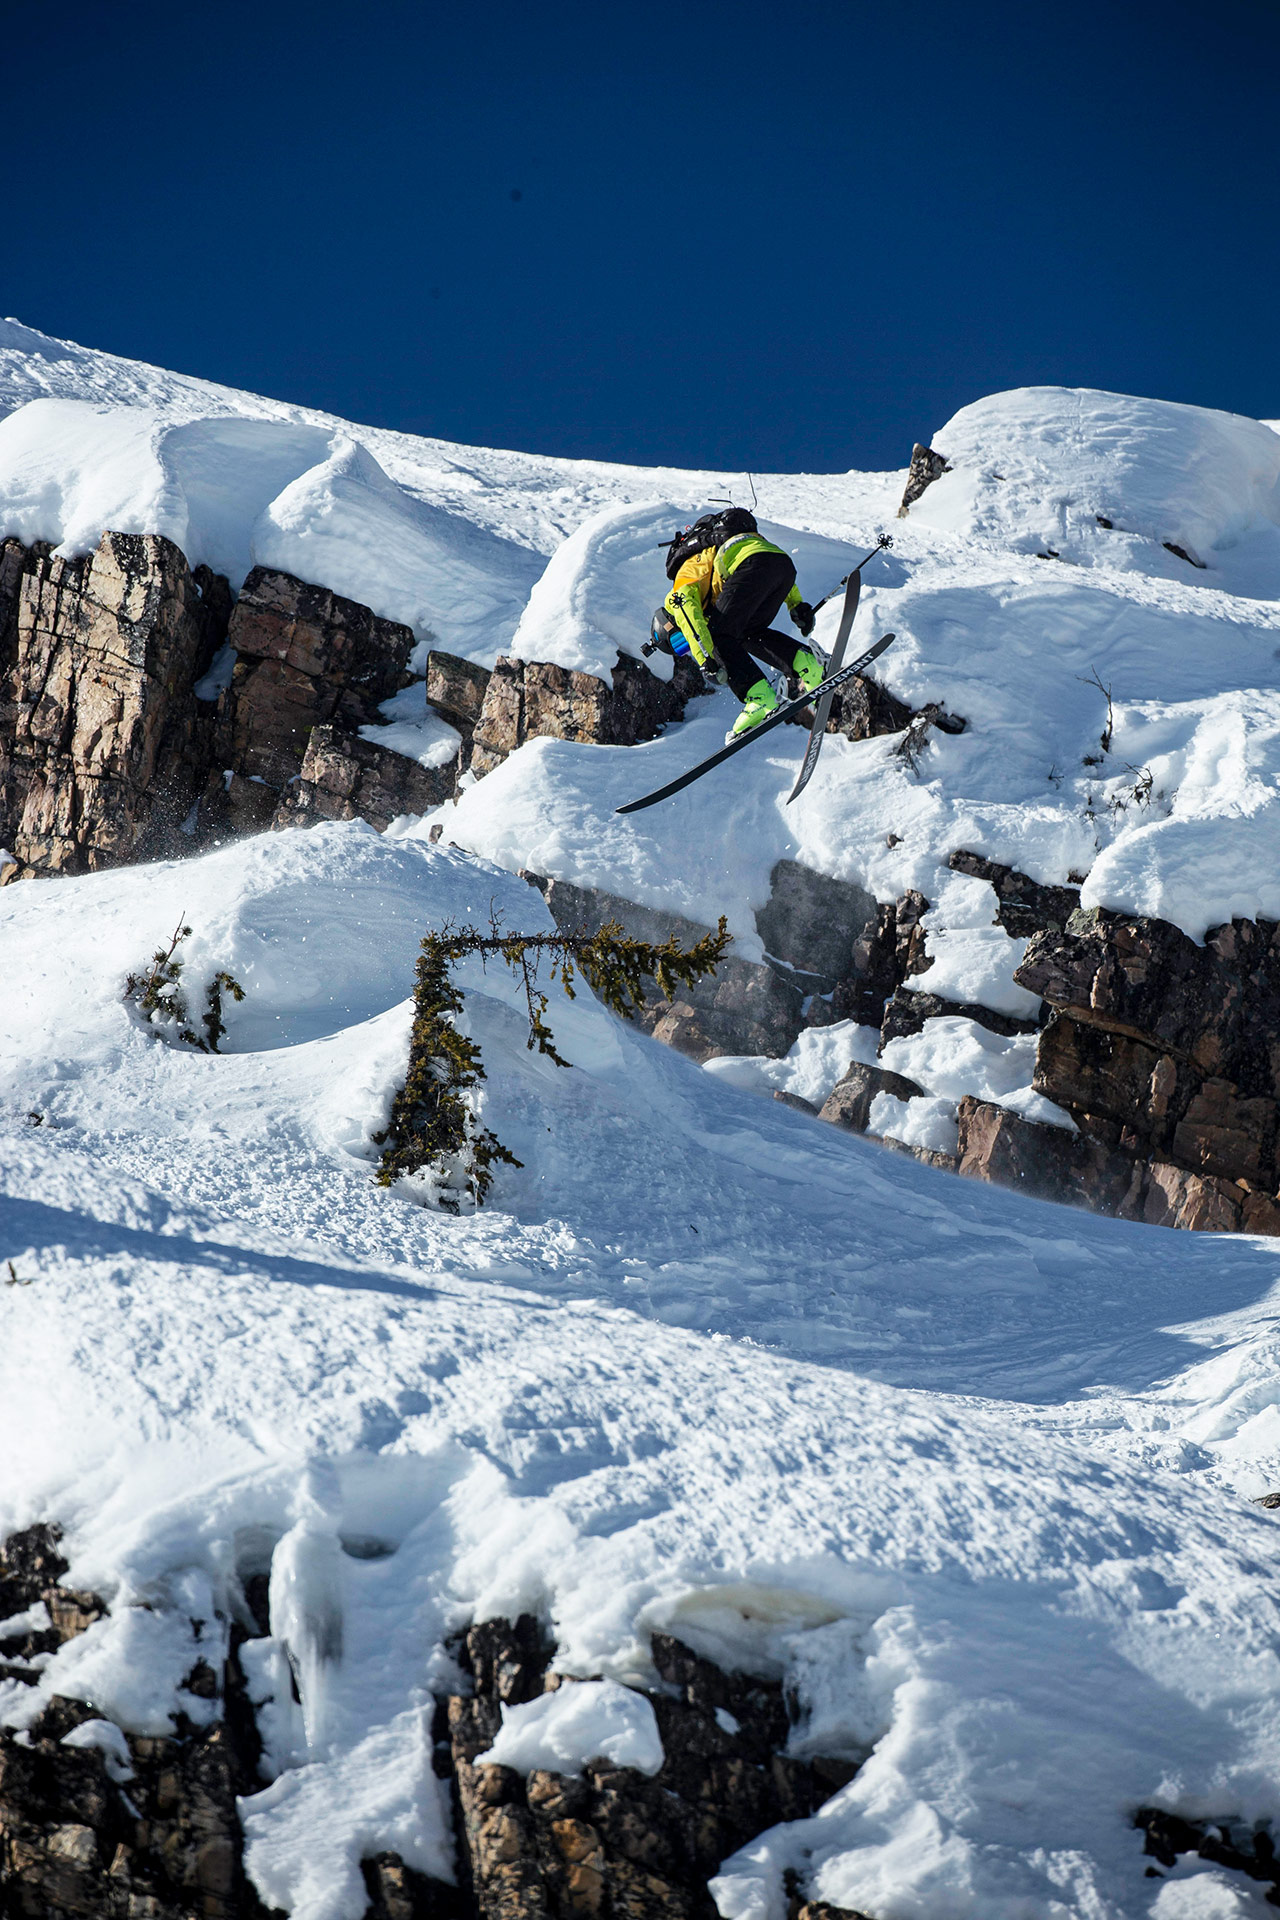 Maxime Chabloz competes on the 2022 Freeride World Tour in Kicking Horse, Canada